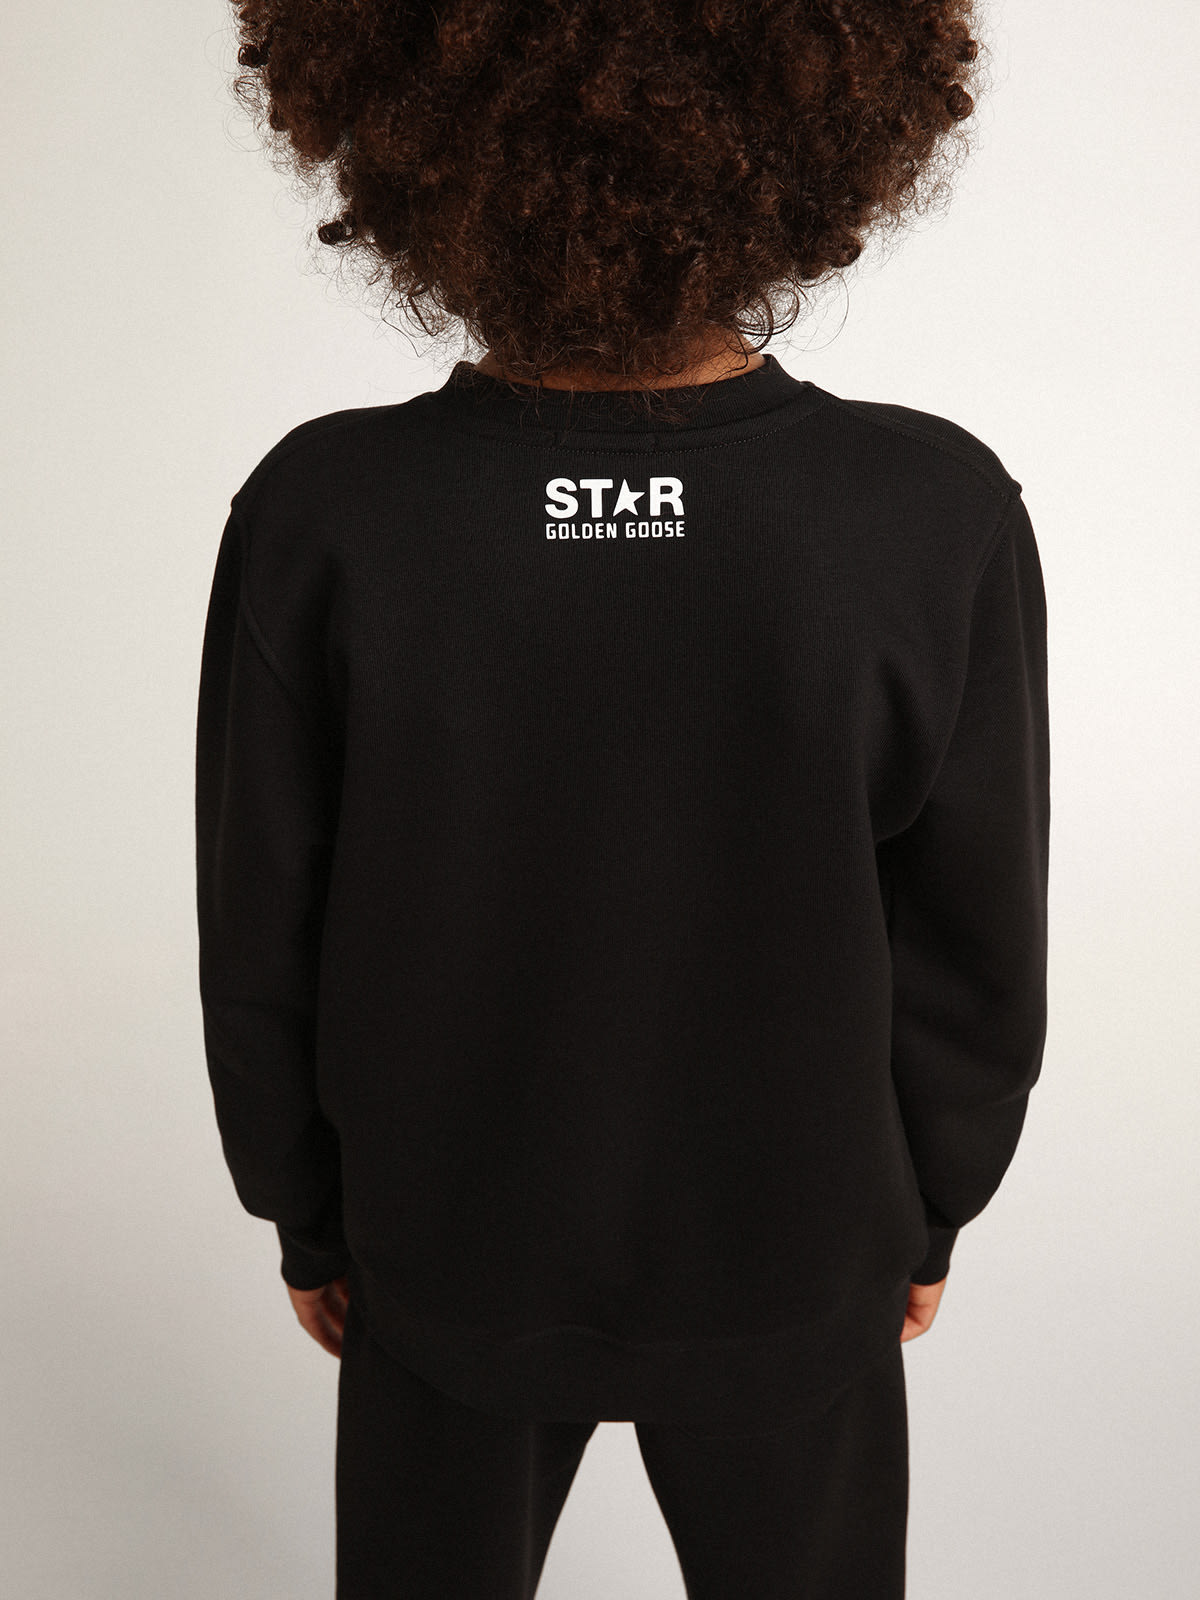 Golden Goose - Black sweatshirt with white maxi star on the front in 